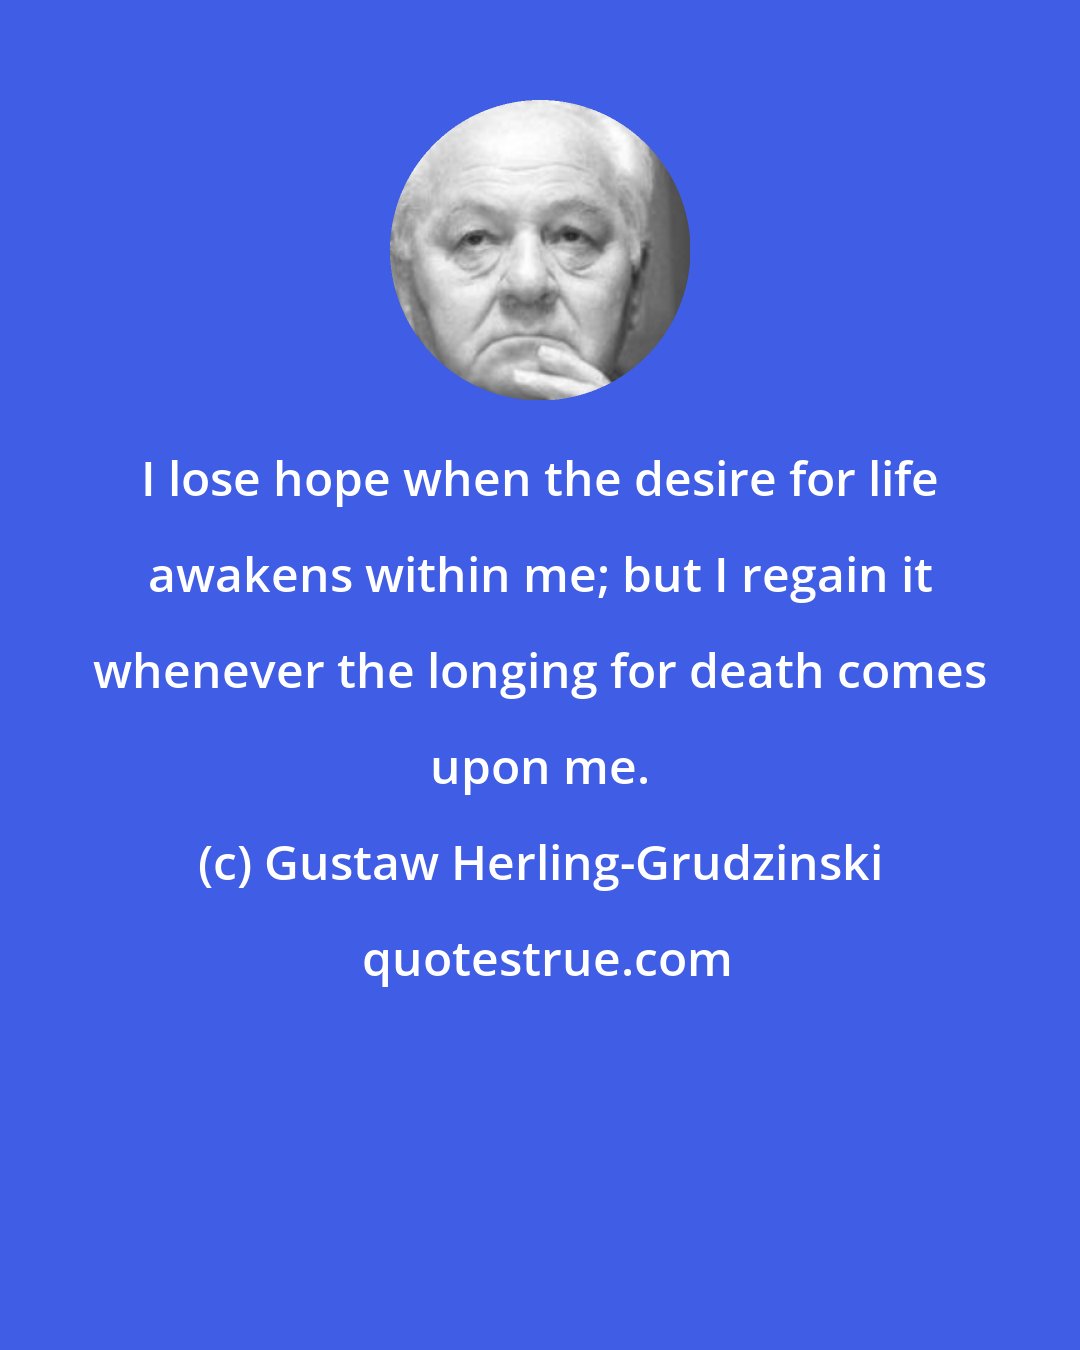 Gustaw Herling-Grudzinski: I lose hope when the desire for life awakens within me; but I regain it whenever the longing for death comes upon me.